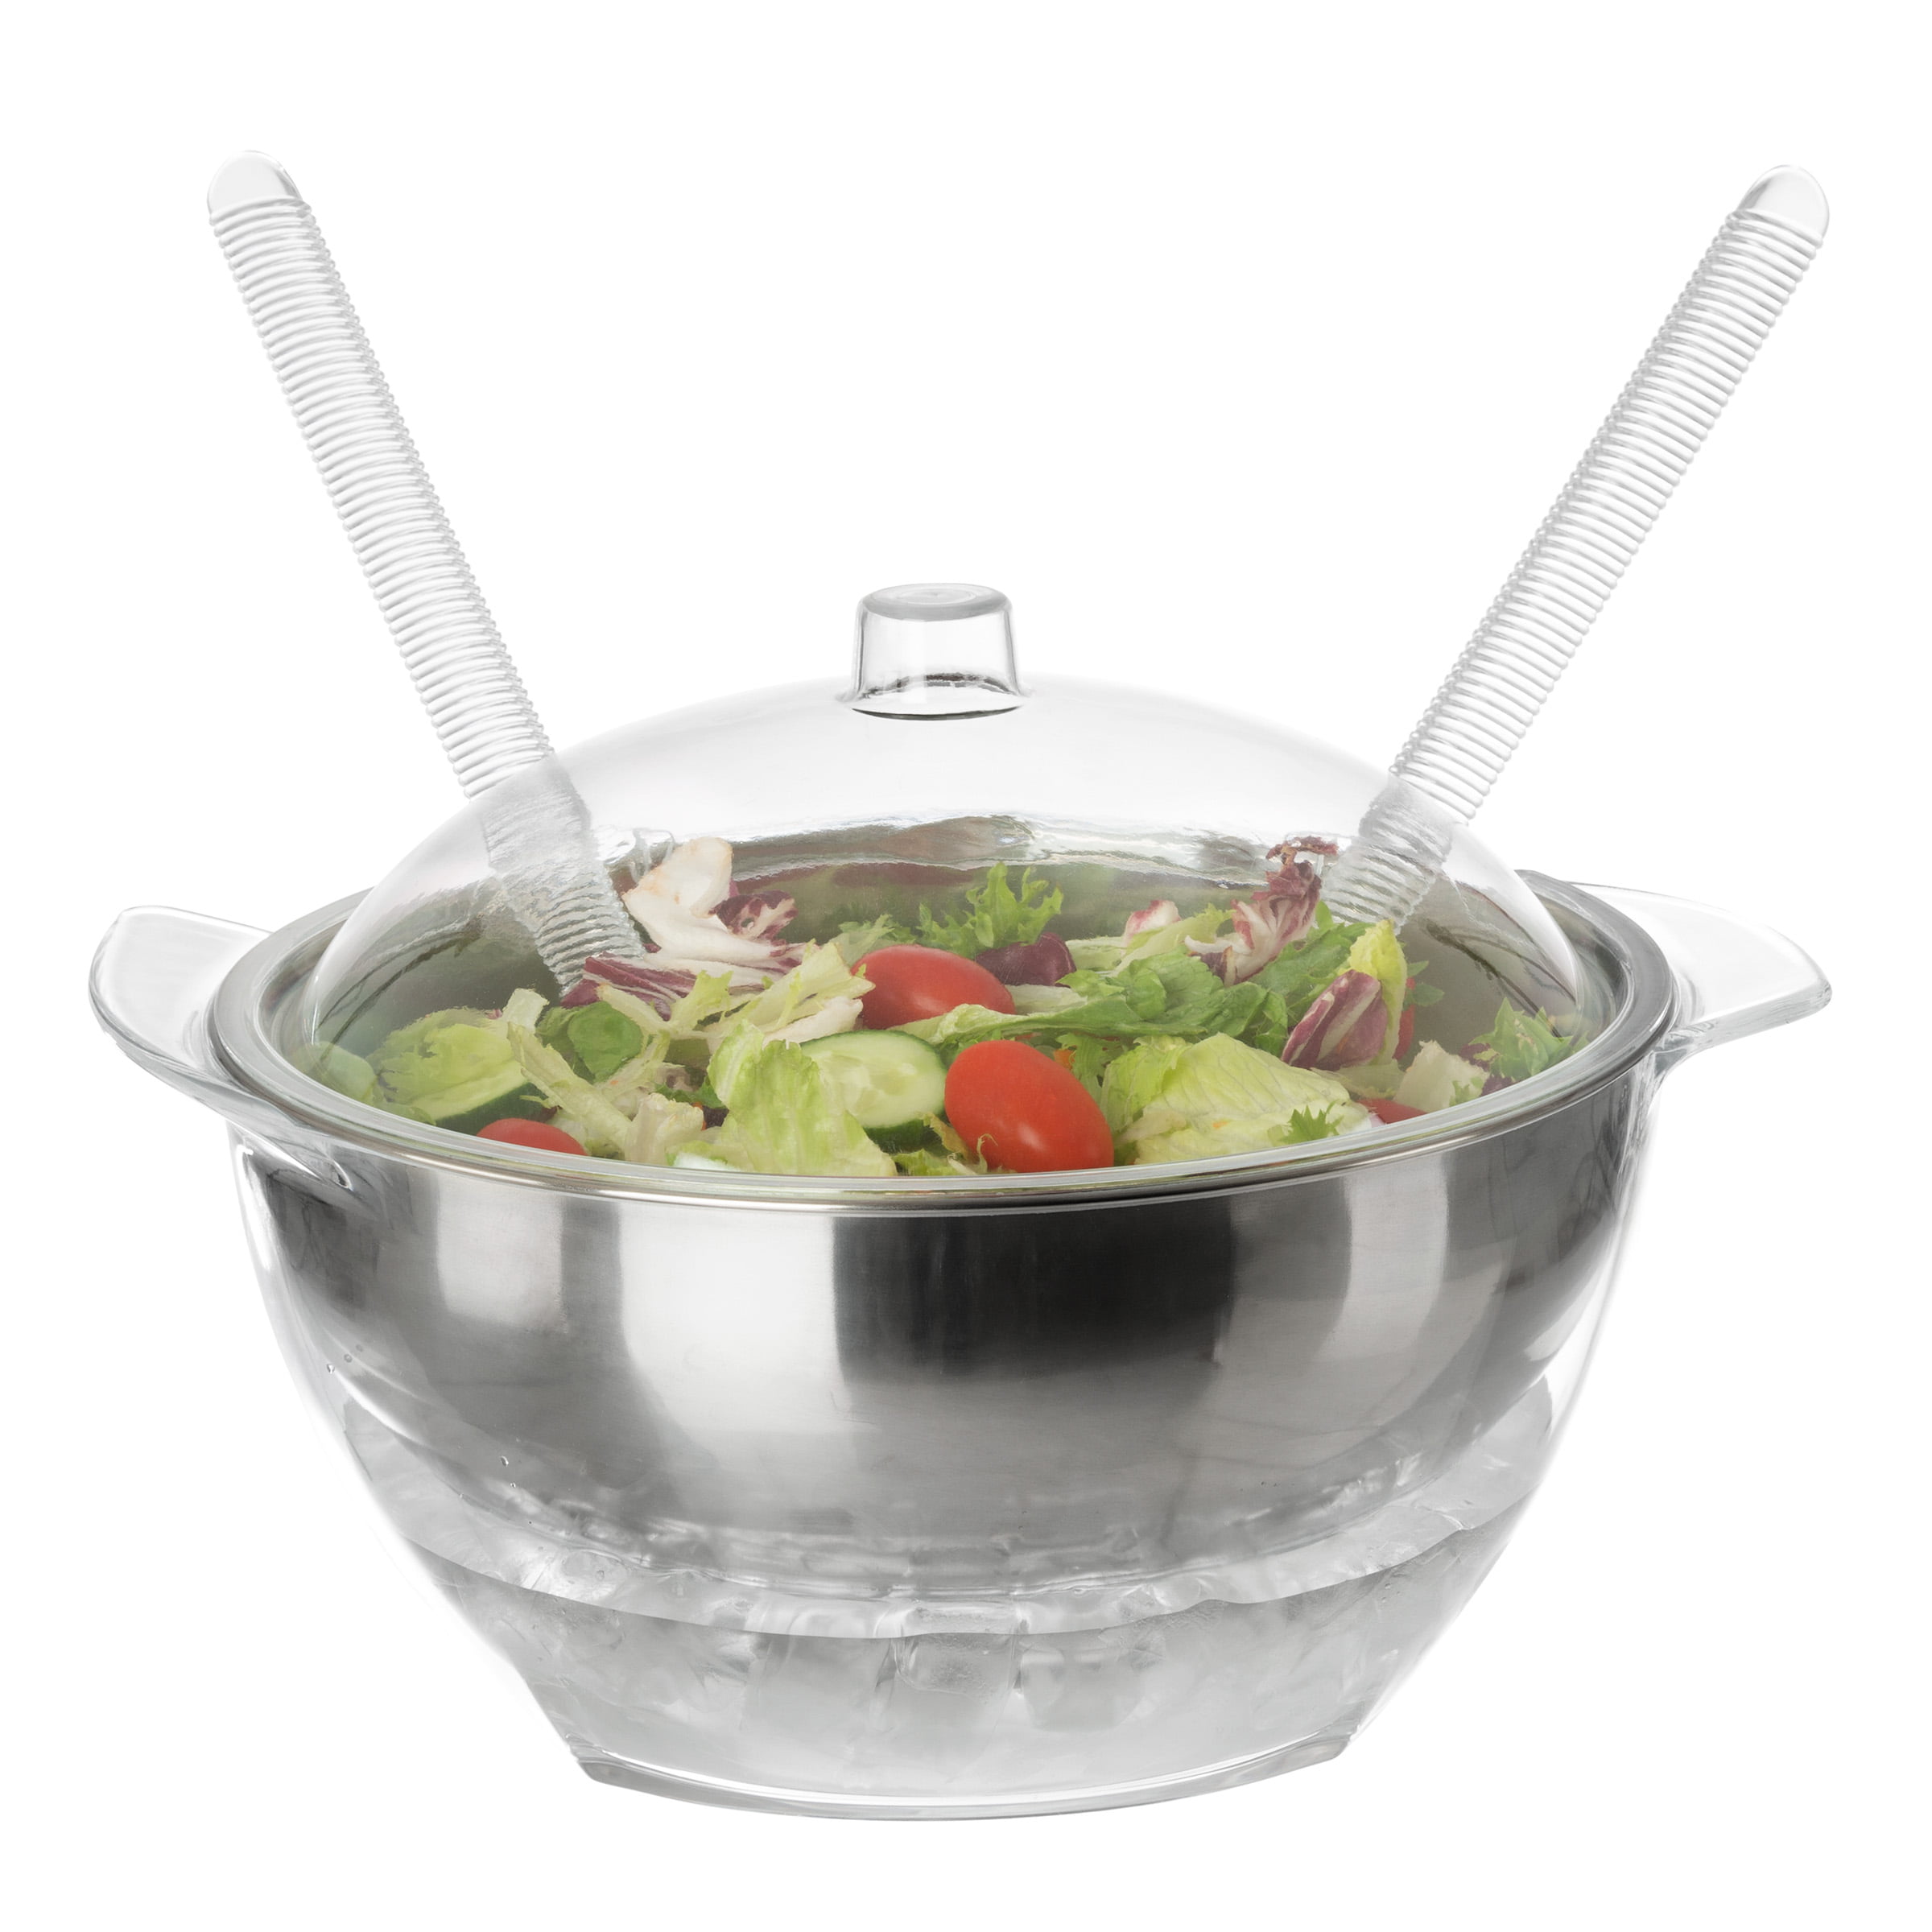 Salad Bowl with Lid and Utensils-5PC Cold Serving Dish Set with Ice  Chamber-For Chilled Pasta, Potato Salad, Fruit and More by Classic Cuisine  